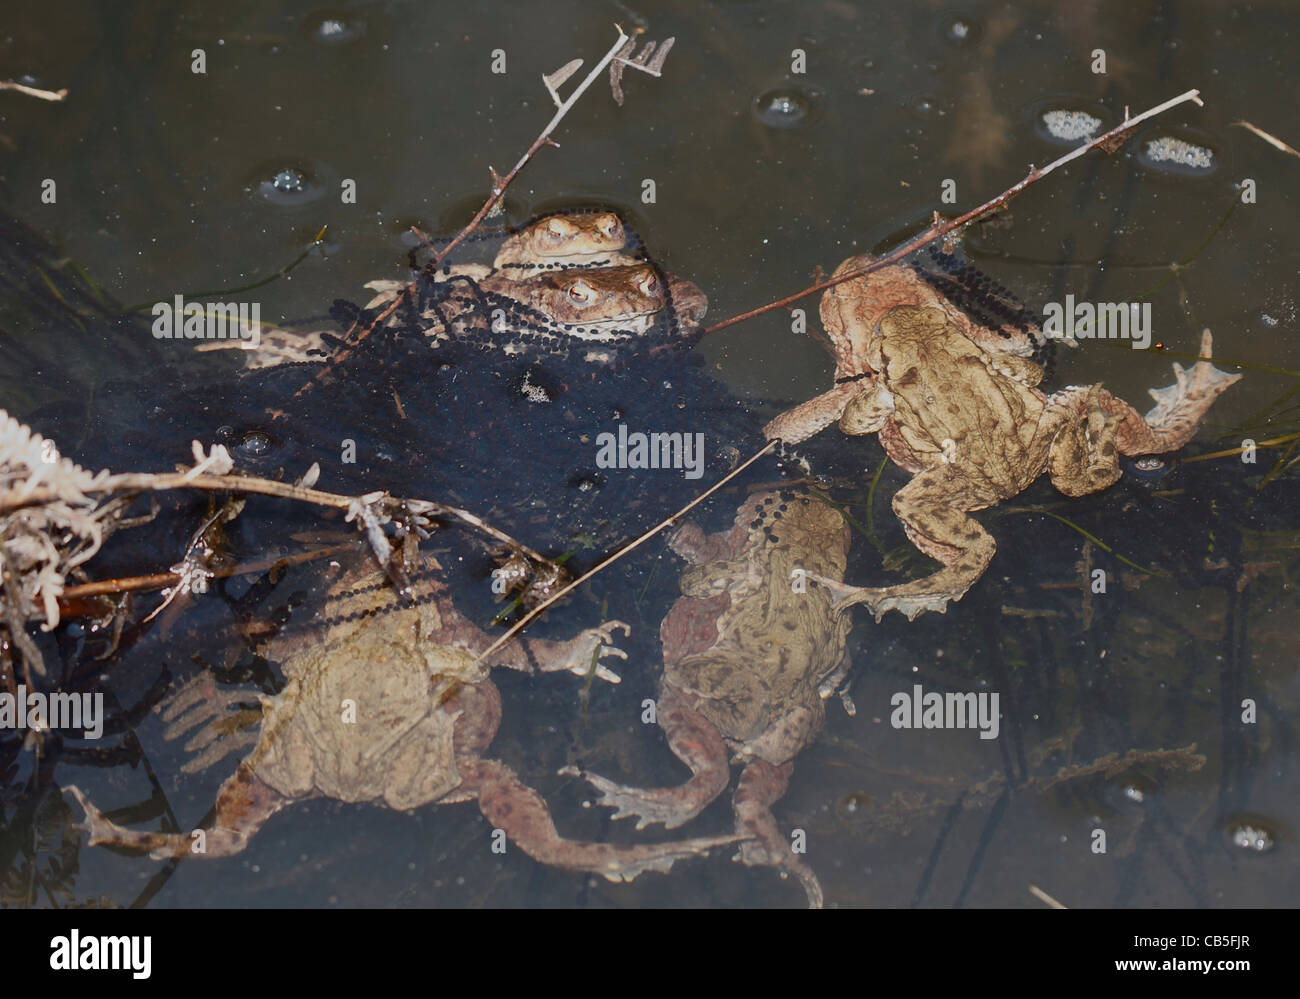 Frogs spawning Stock Photo